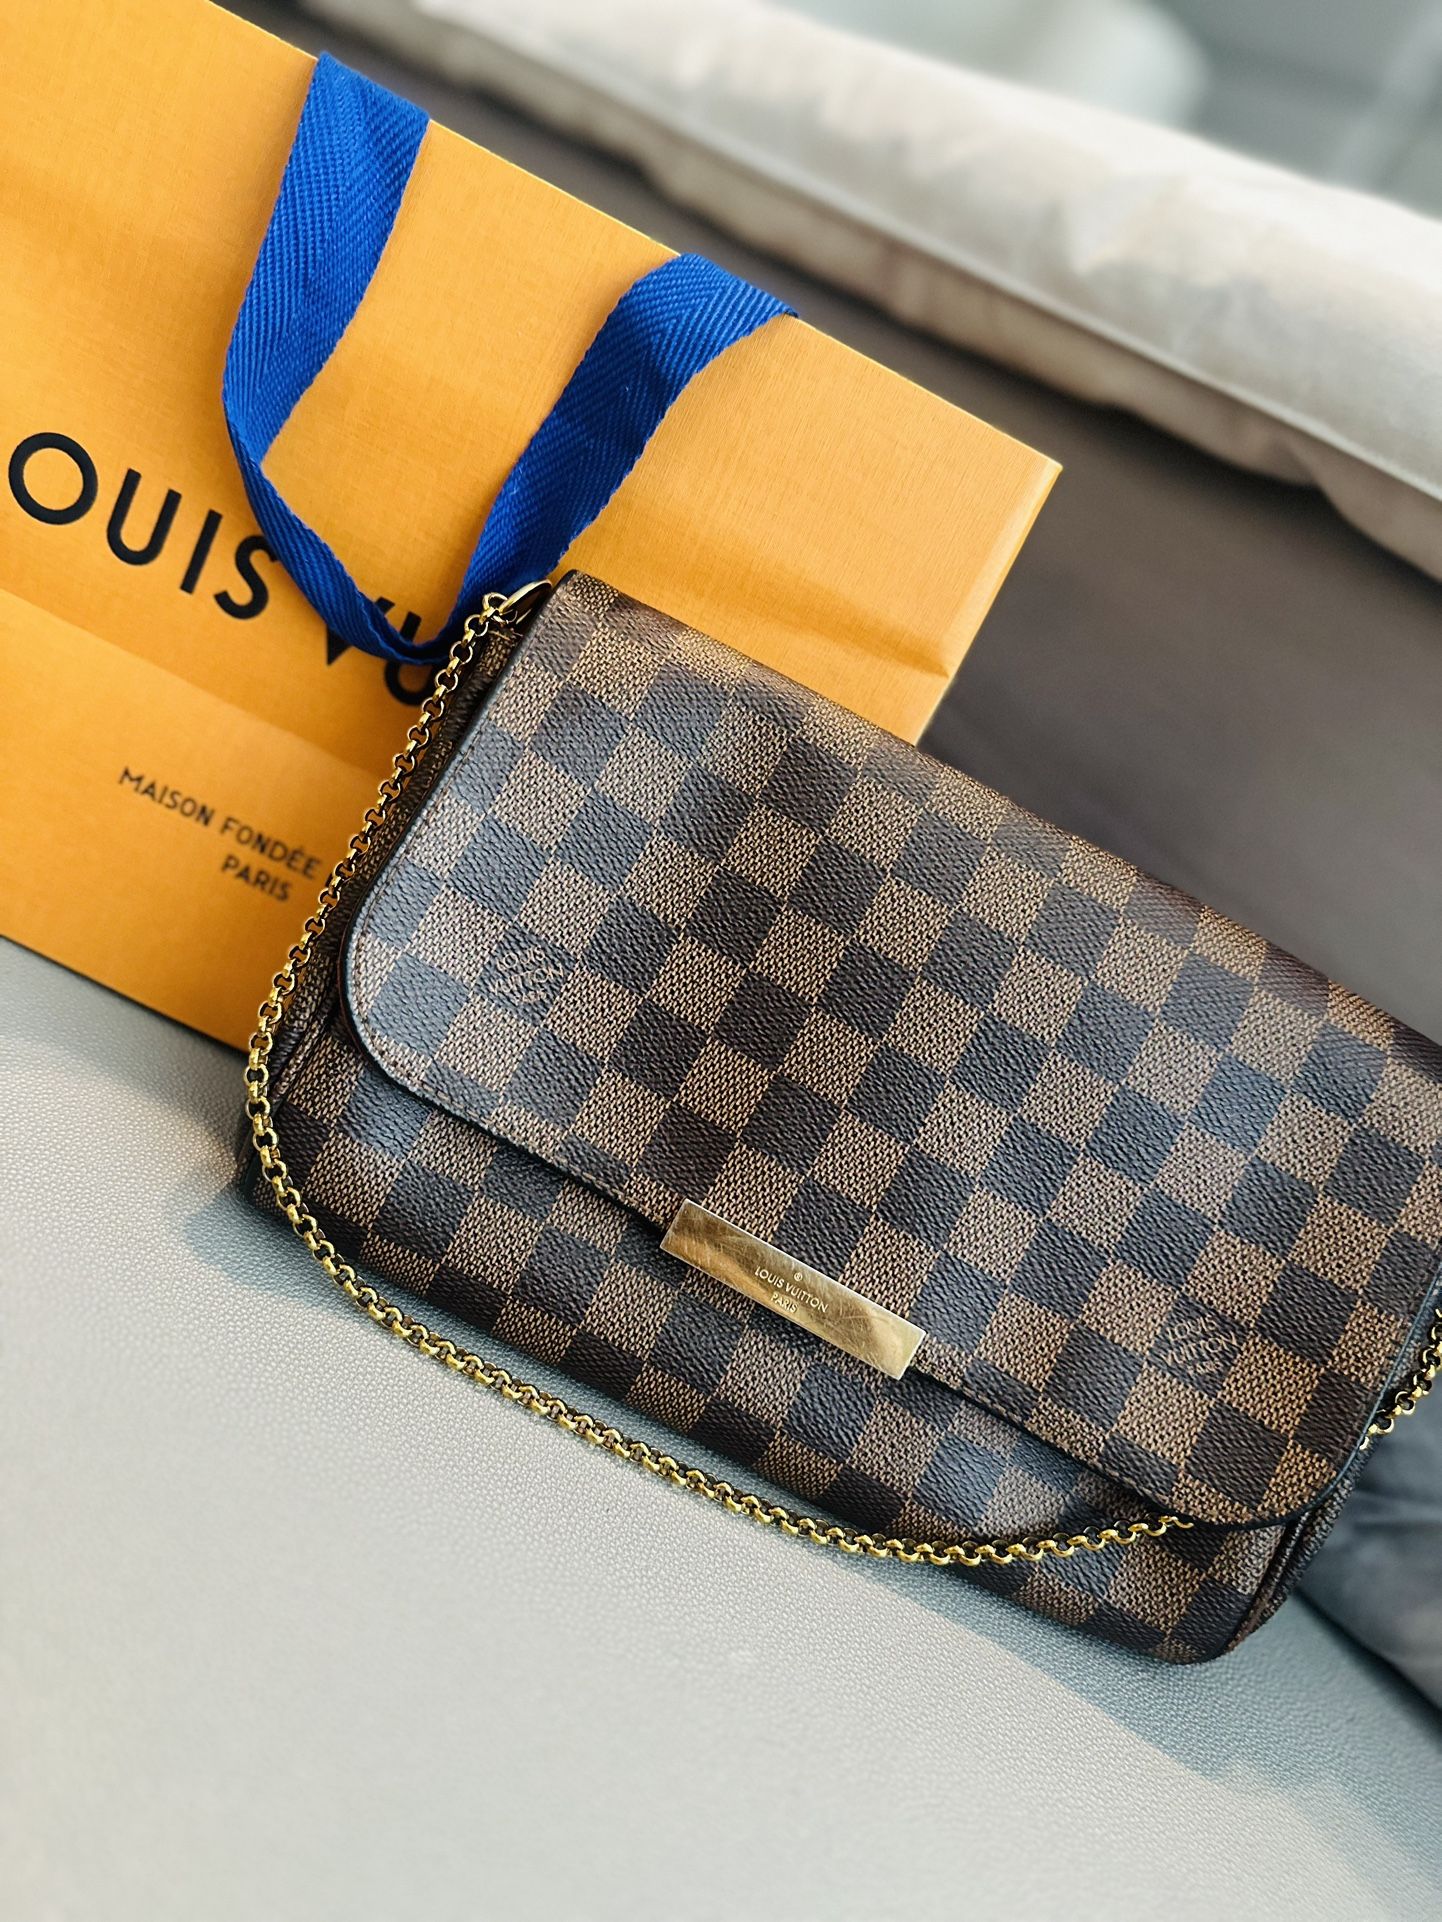 Authentic LV Purse And Wallet